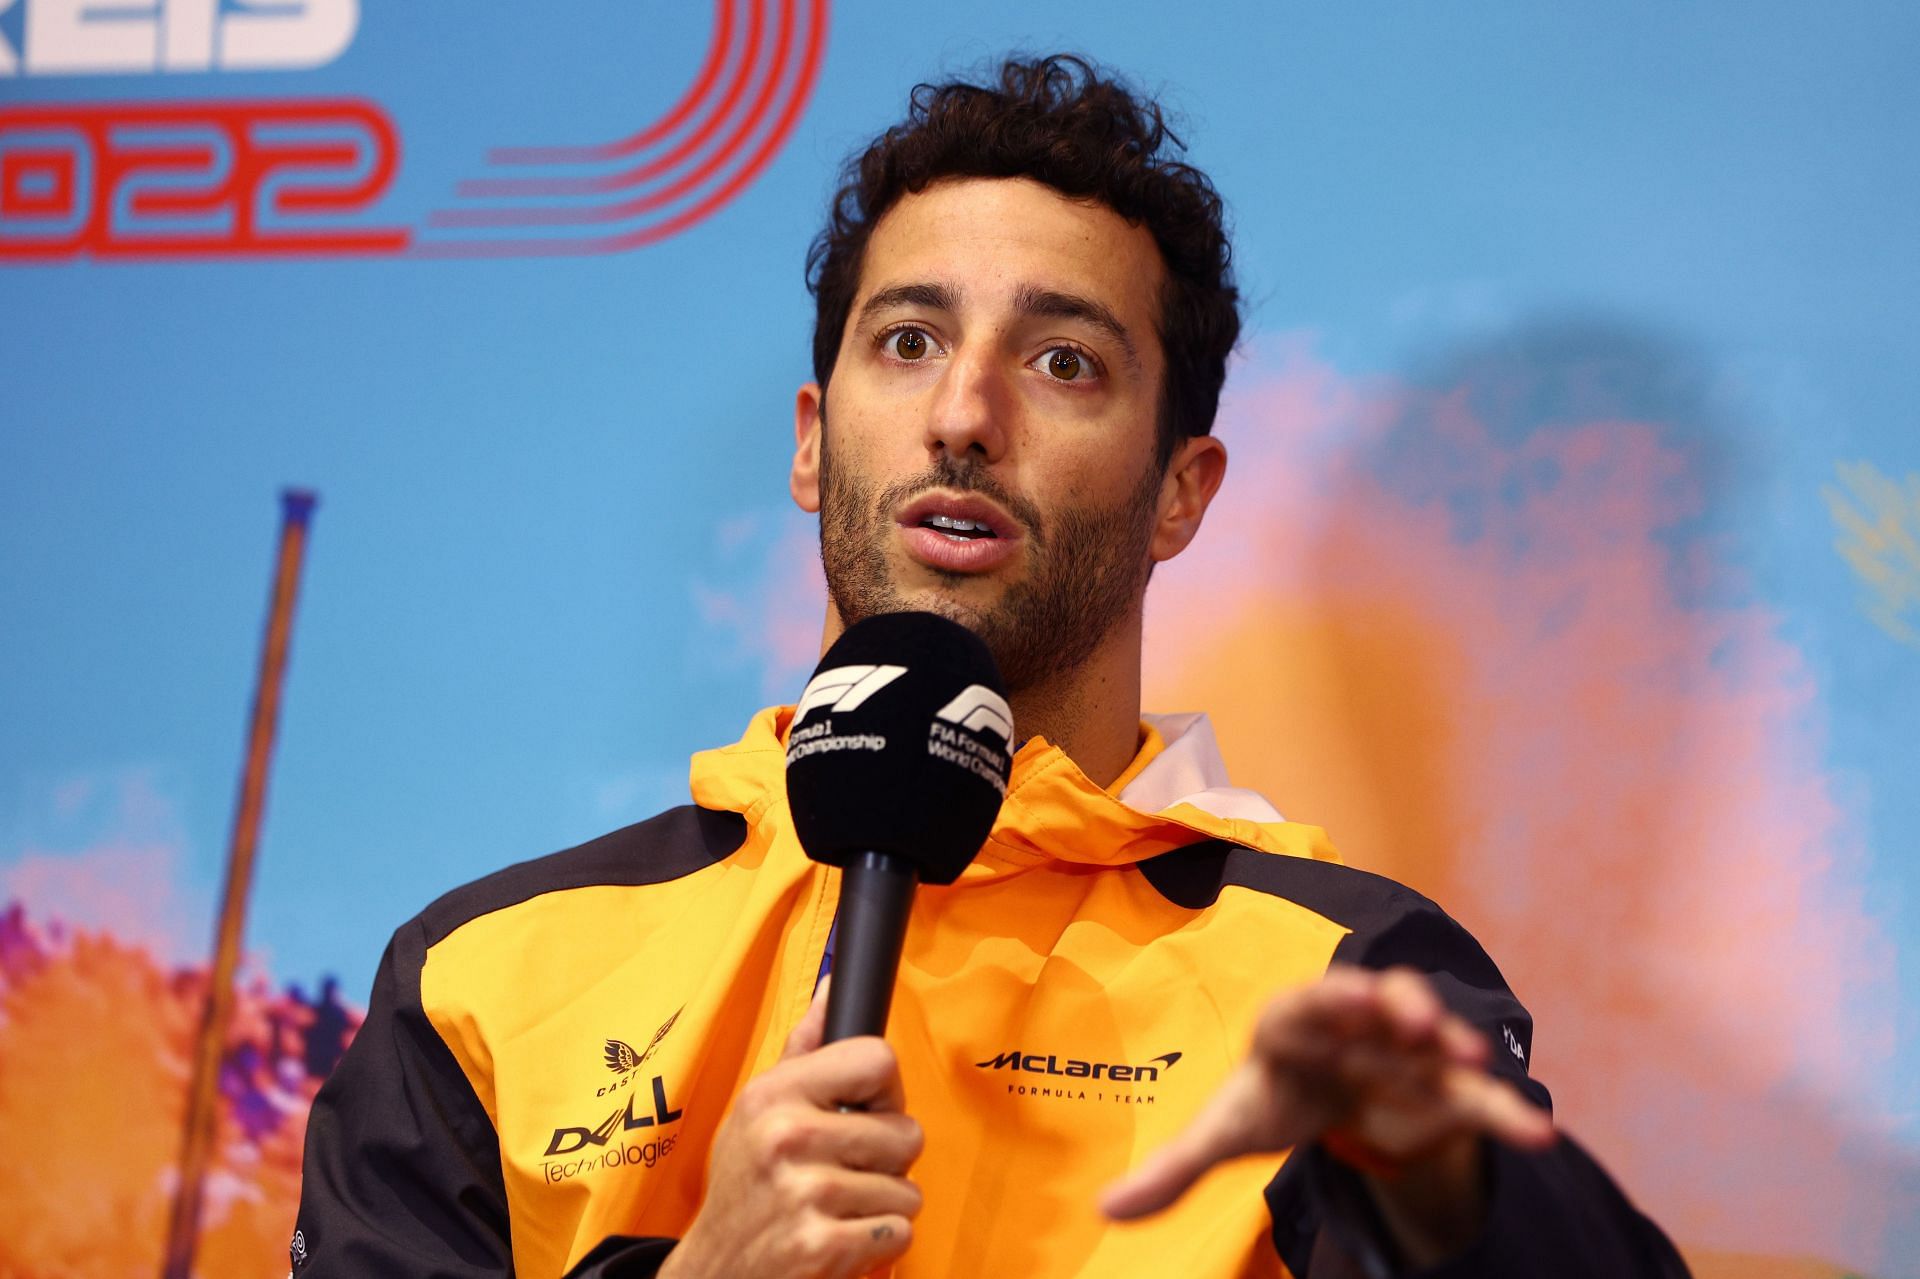 Daniel Ricciardo at the F1 Grand Prix of Austria at Red Bull Ring on July 07, 2022, in Spielberg, Austria (Photo by Clive Rose/Getty Images)